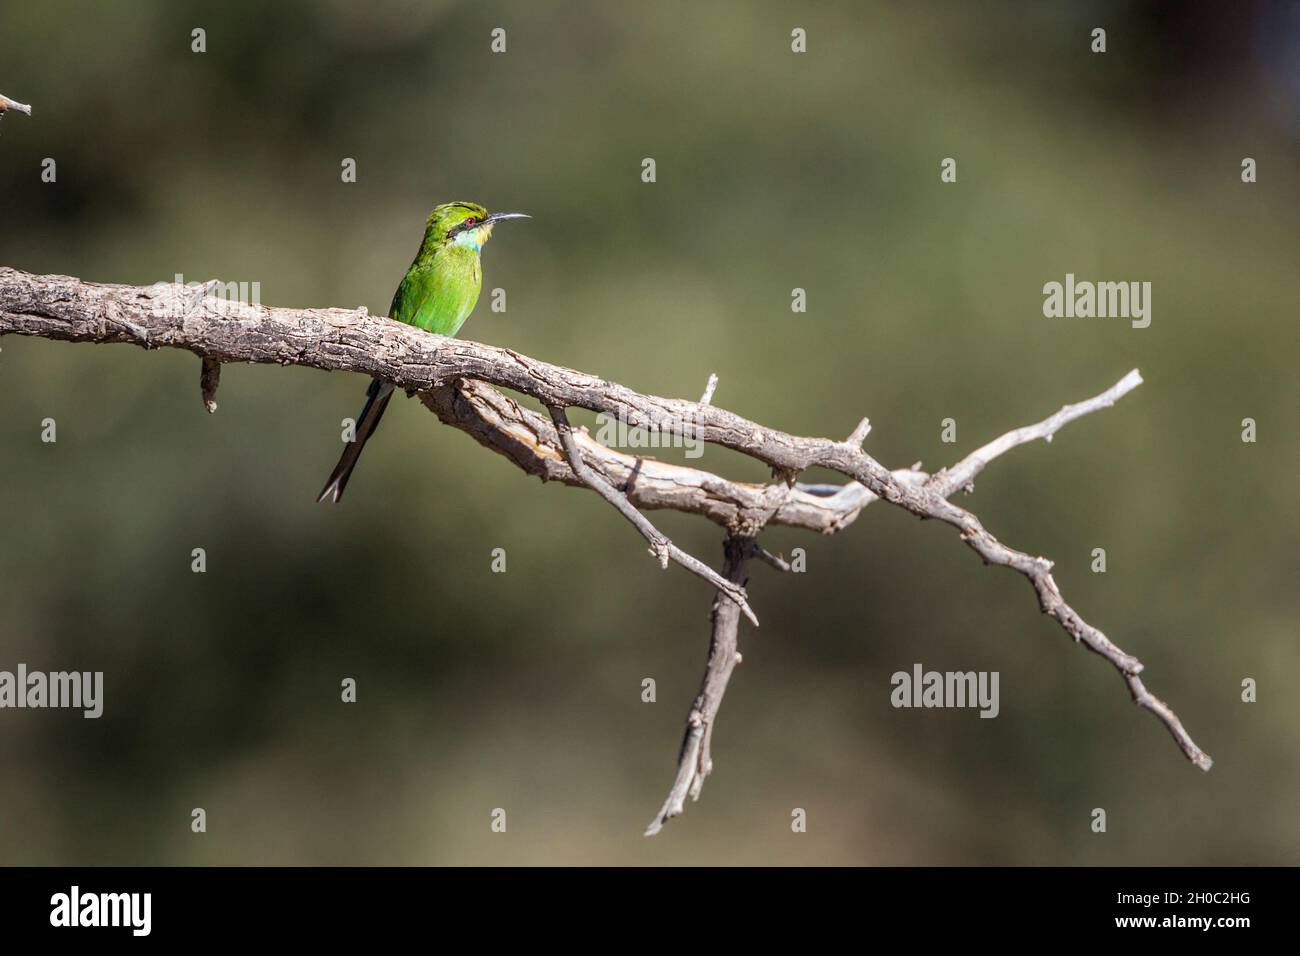 Swallow tailed Bee eater (Merops hirundineus) standing on a branch isolated in natural background in Kgalagadi transfrontier park, South Africa Stock Photo